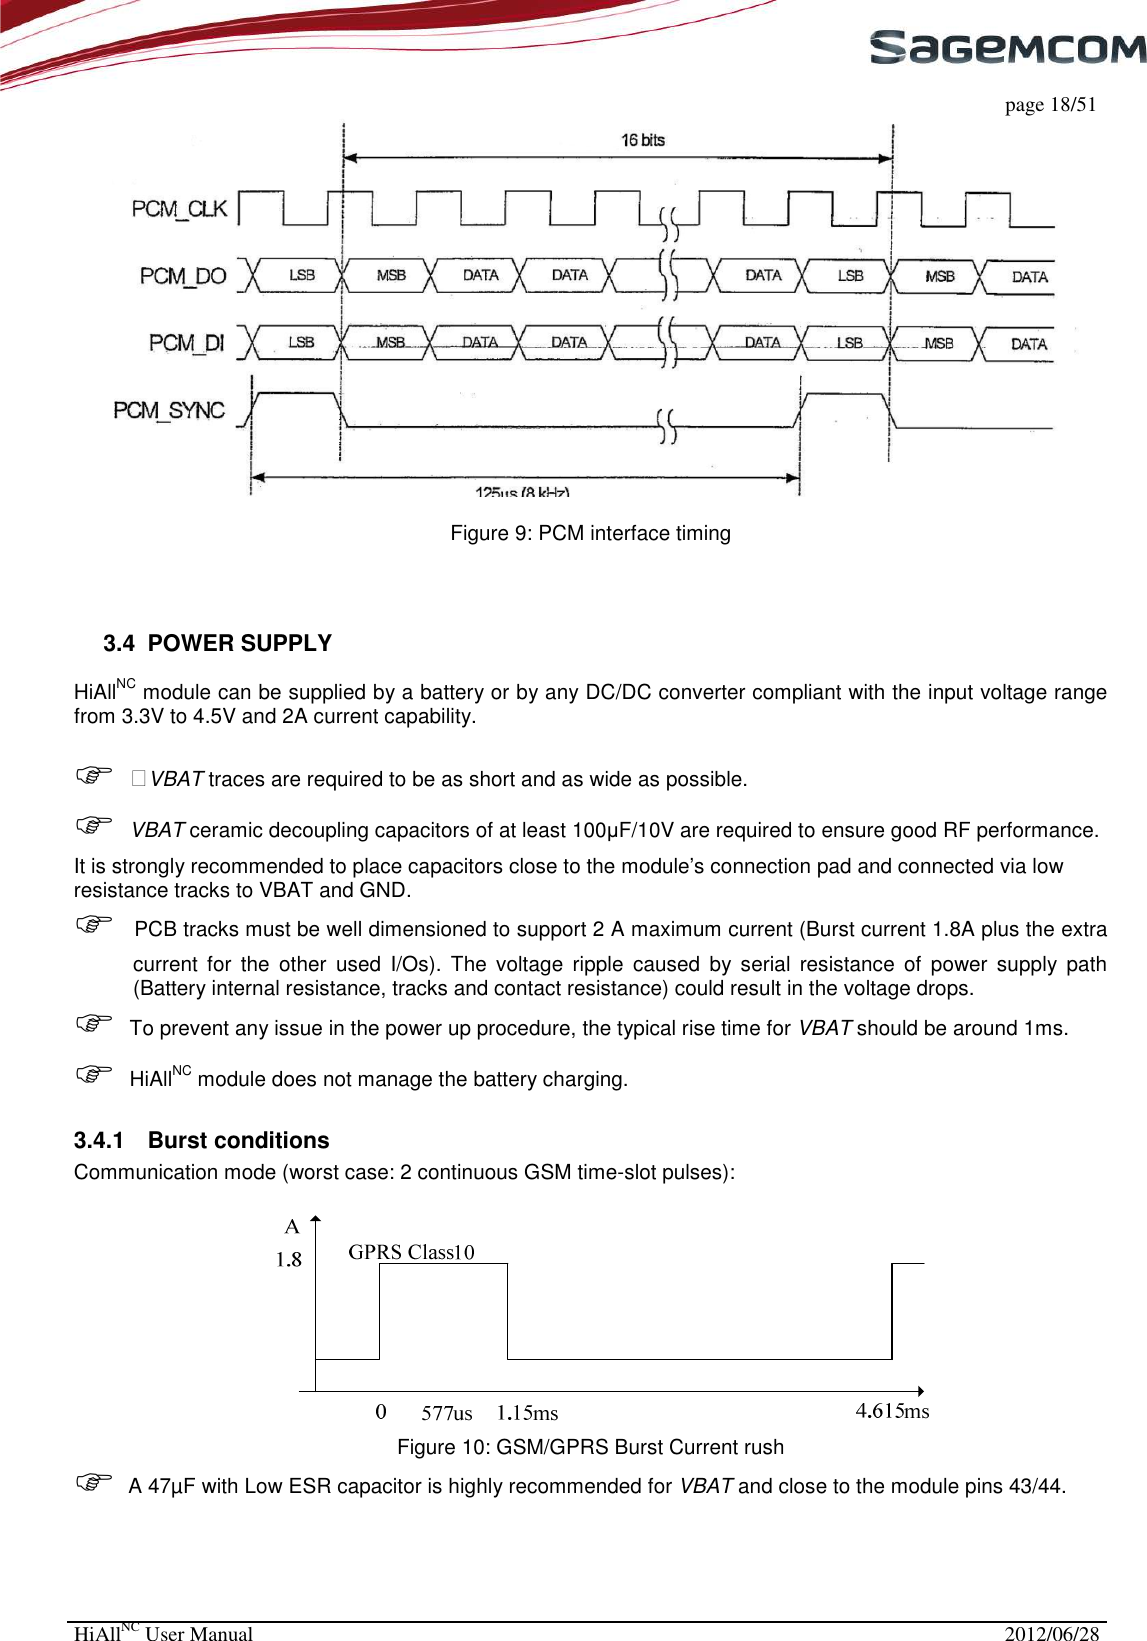     page 18/51 HiAllNC User Manual  2012/06/28    Figure 9: PCM interface timing    3.4  POWER SUPPLY HiAllNC module can be supplied by a battery or by any DC/DC converter compliant with the input voltage range from 3.3V to 4.5V and 2A current capability.   &gt;VBAT traces are required to be as short and as wide as possible.   VBAT ceramic decoupling capacitors of at least 100µF/10V are required to ensure good RF performance. It is strongly recommended to place capacitors close to the module’s connection pad and connected via low resistance tracks to VBAT and GND.   PCB tracks must be well dimensioned to support 2 A maximum current (Burst current 1.8A plus the extra current  for  the  other  used  I/Os).  The  voltage  ripple  caused  by  serial  resistance  of  power  supply  path (Battery internal resistance, tracks and contact resistance) could result in the voltage drops.  To prevent any issue in the power up procedure, the typical rise time for VBAT should be around 1ms.   HiAllNC module does not manage the battery charging. 3.4.1  Burst conditions Communication mode (worst case: 2 continuous GSM time-slot pulses):  Figure 10: GSM/GPRS Burst Current rush  A 47µF with Low ESR capacitor is highly recommended for VBAT and close to the module pins 43/44. 